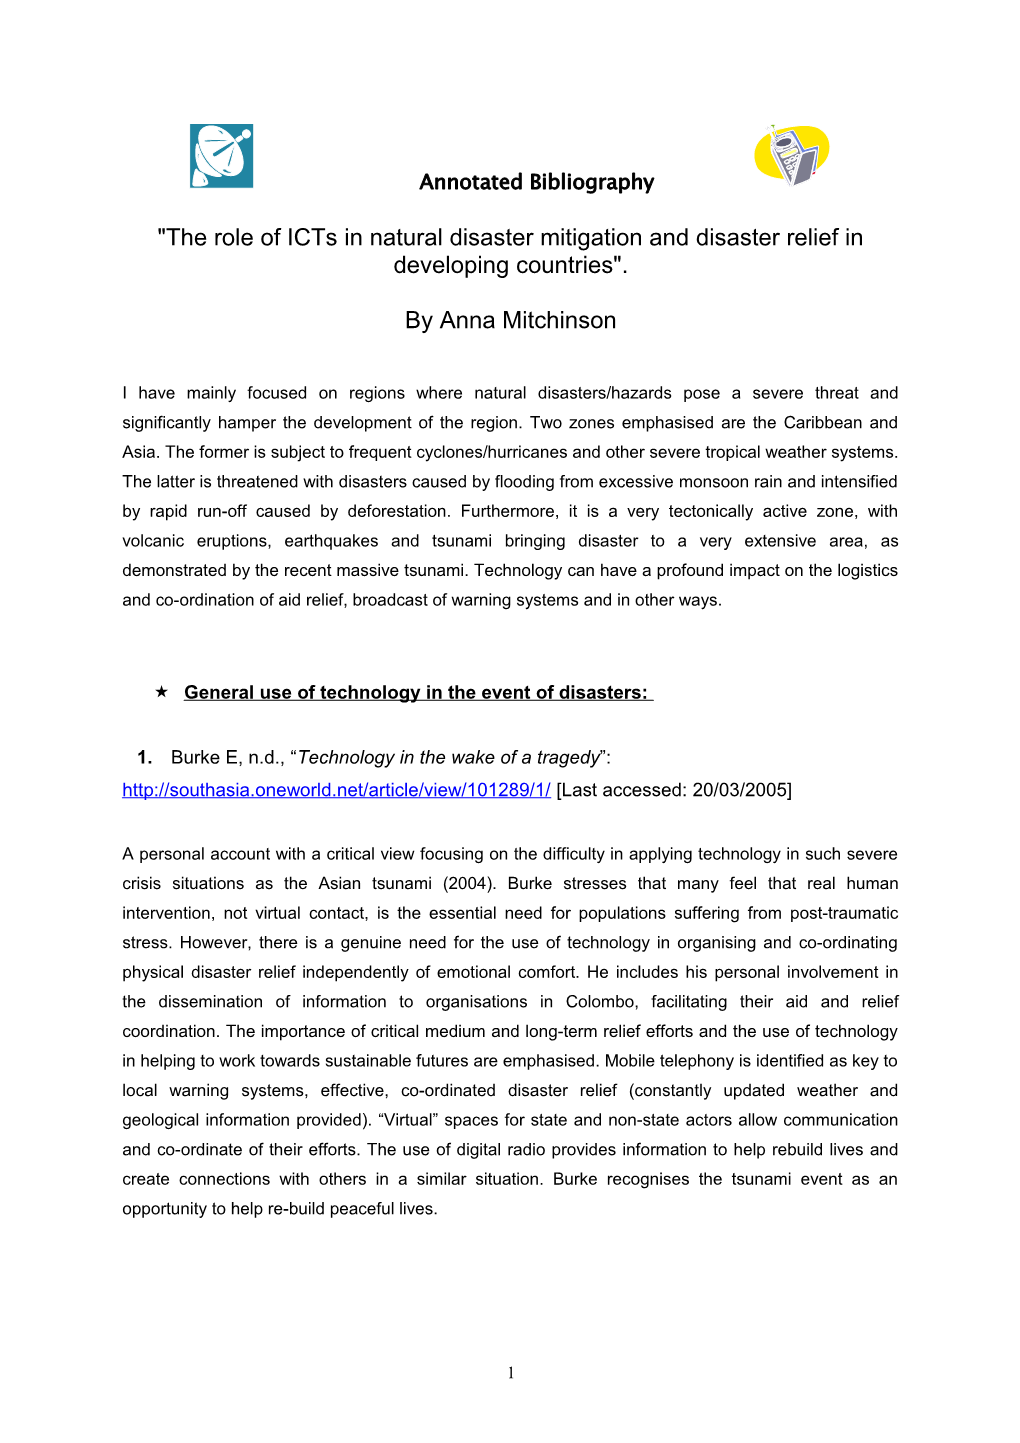 The Role of Icts in Natural Disaster Mitigation and Disaster Relief in Developing Countries